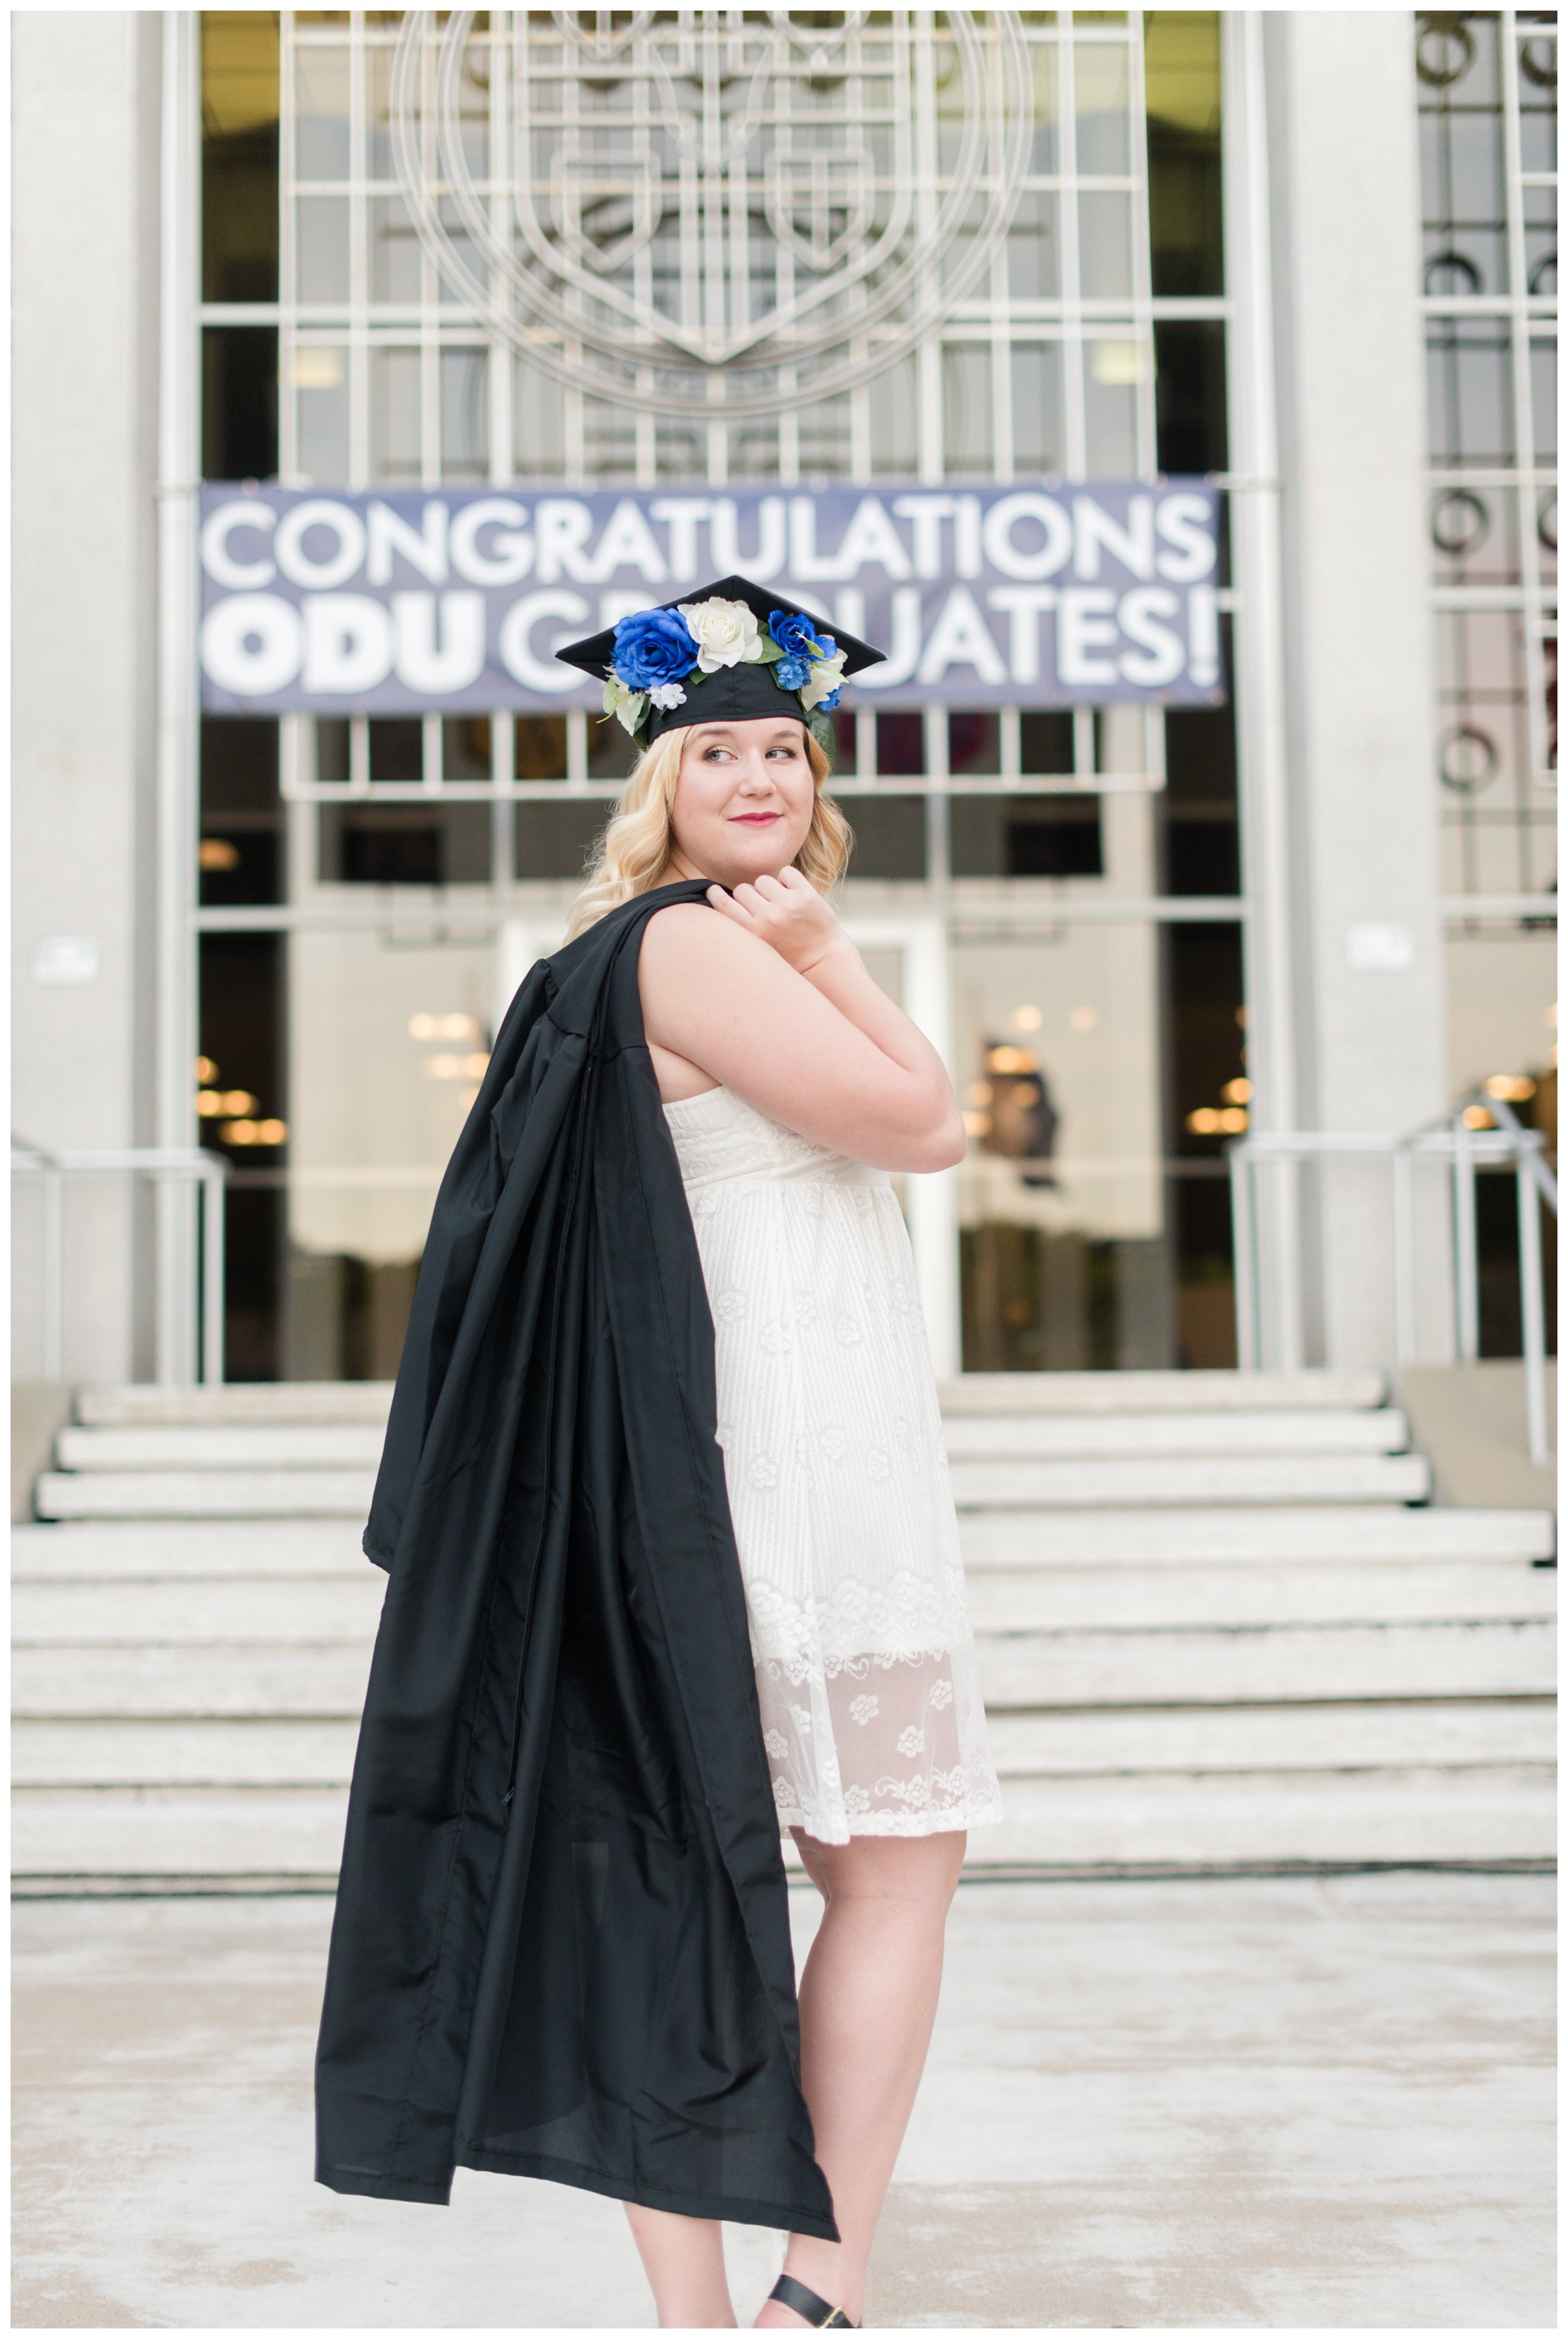 old dominion university cap and gown graduate session